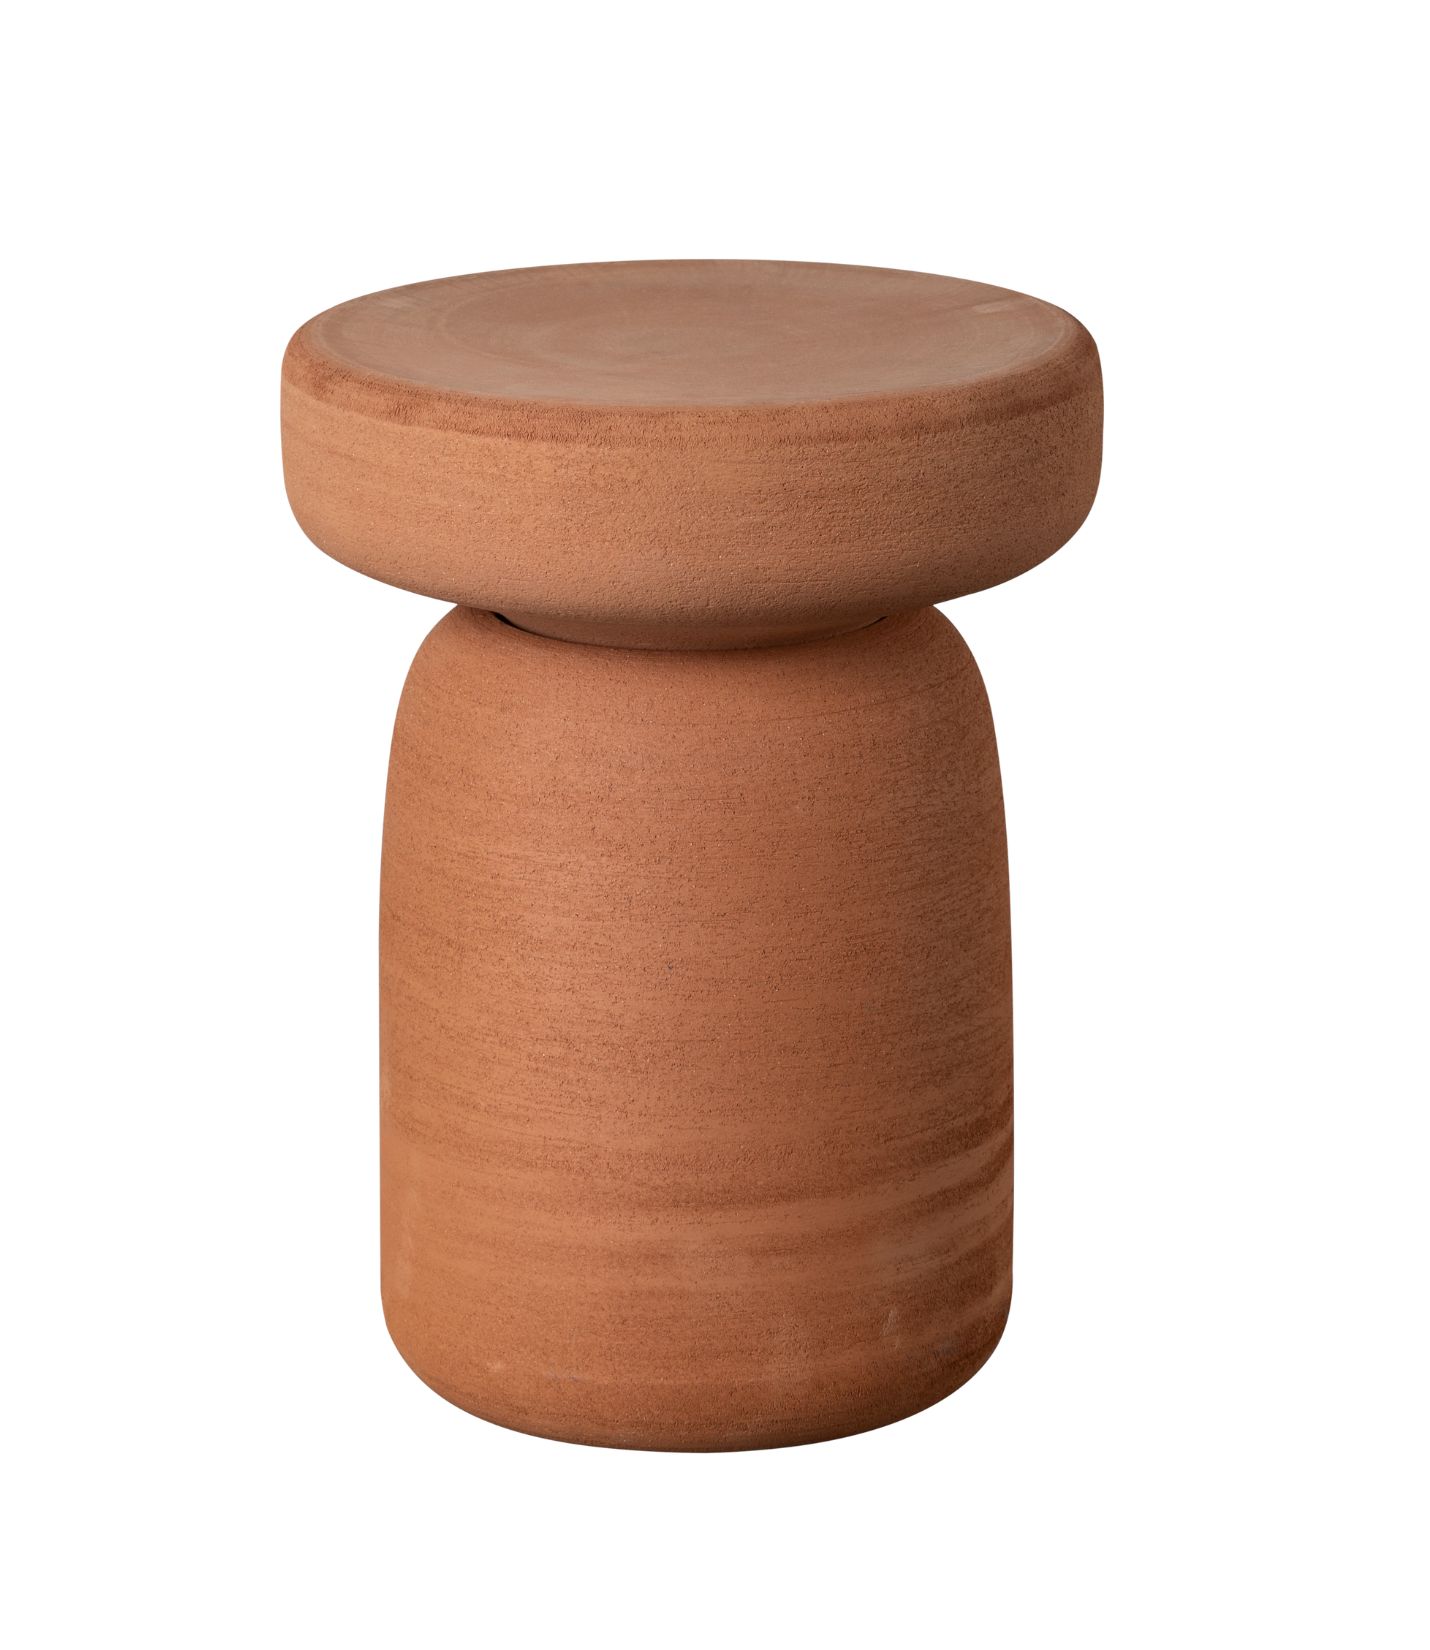 Tototo Side Table High